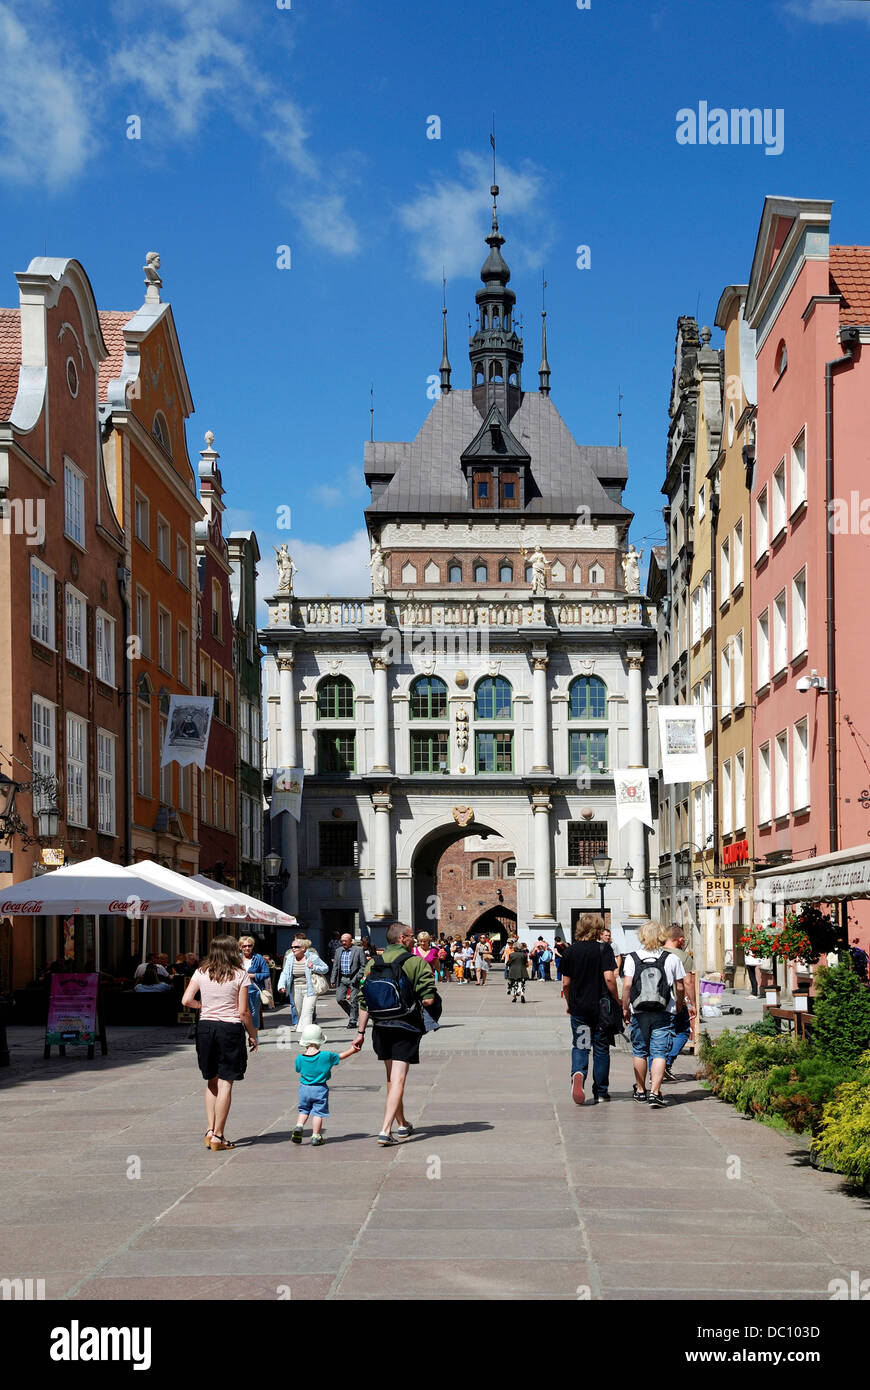 Historic Old town of Gdansk with the Golden gate in the Long lane. Stock Photo